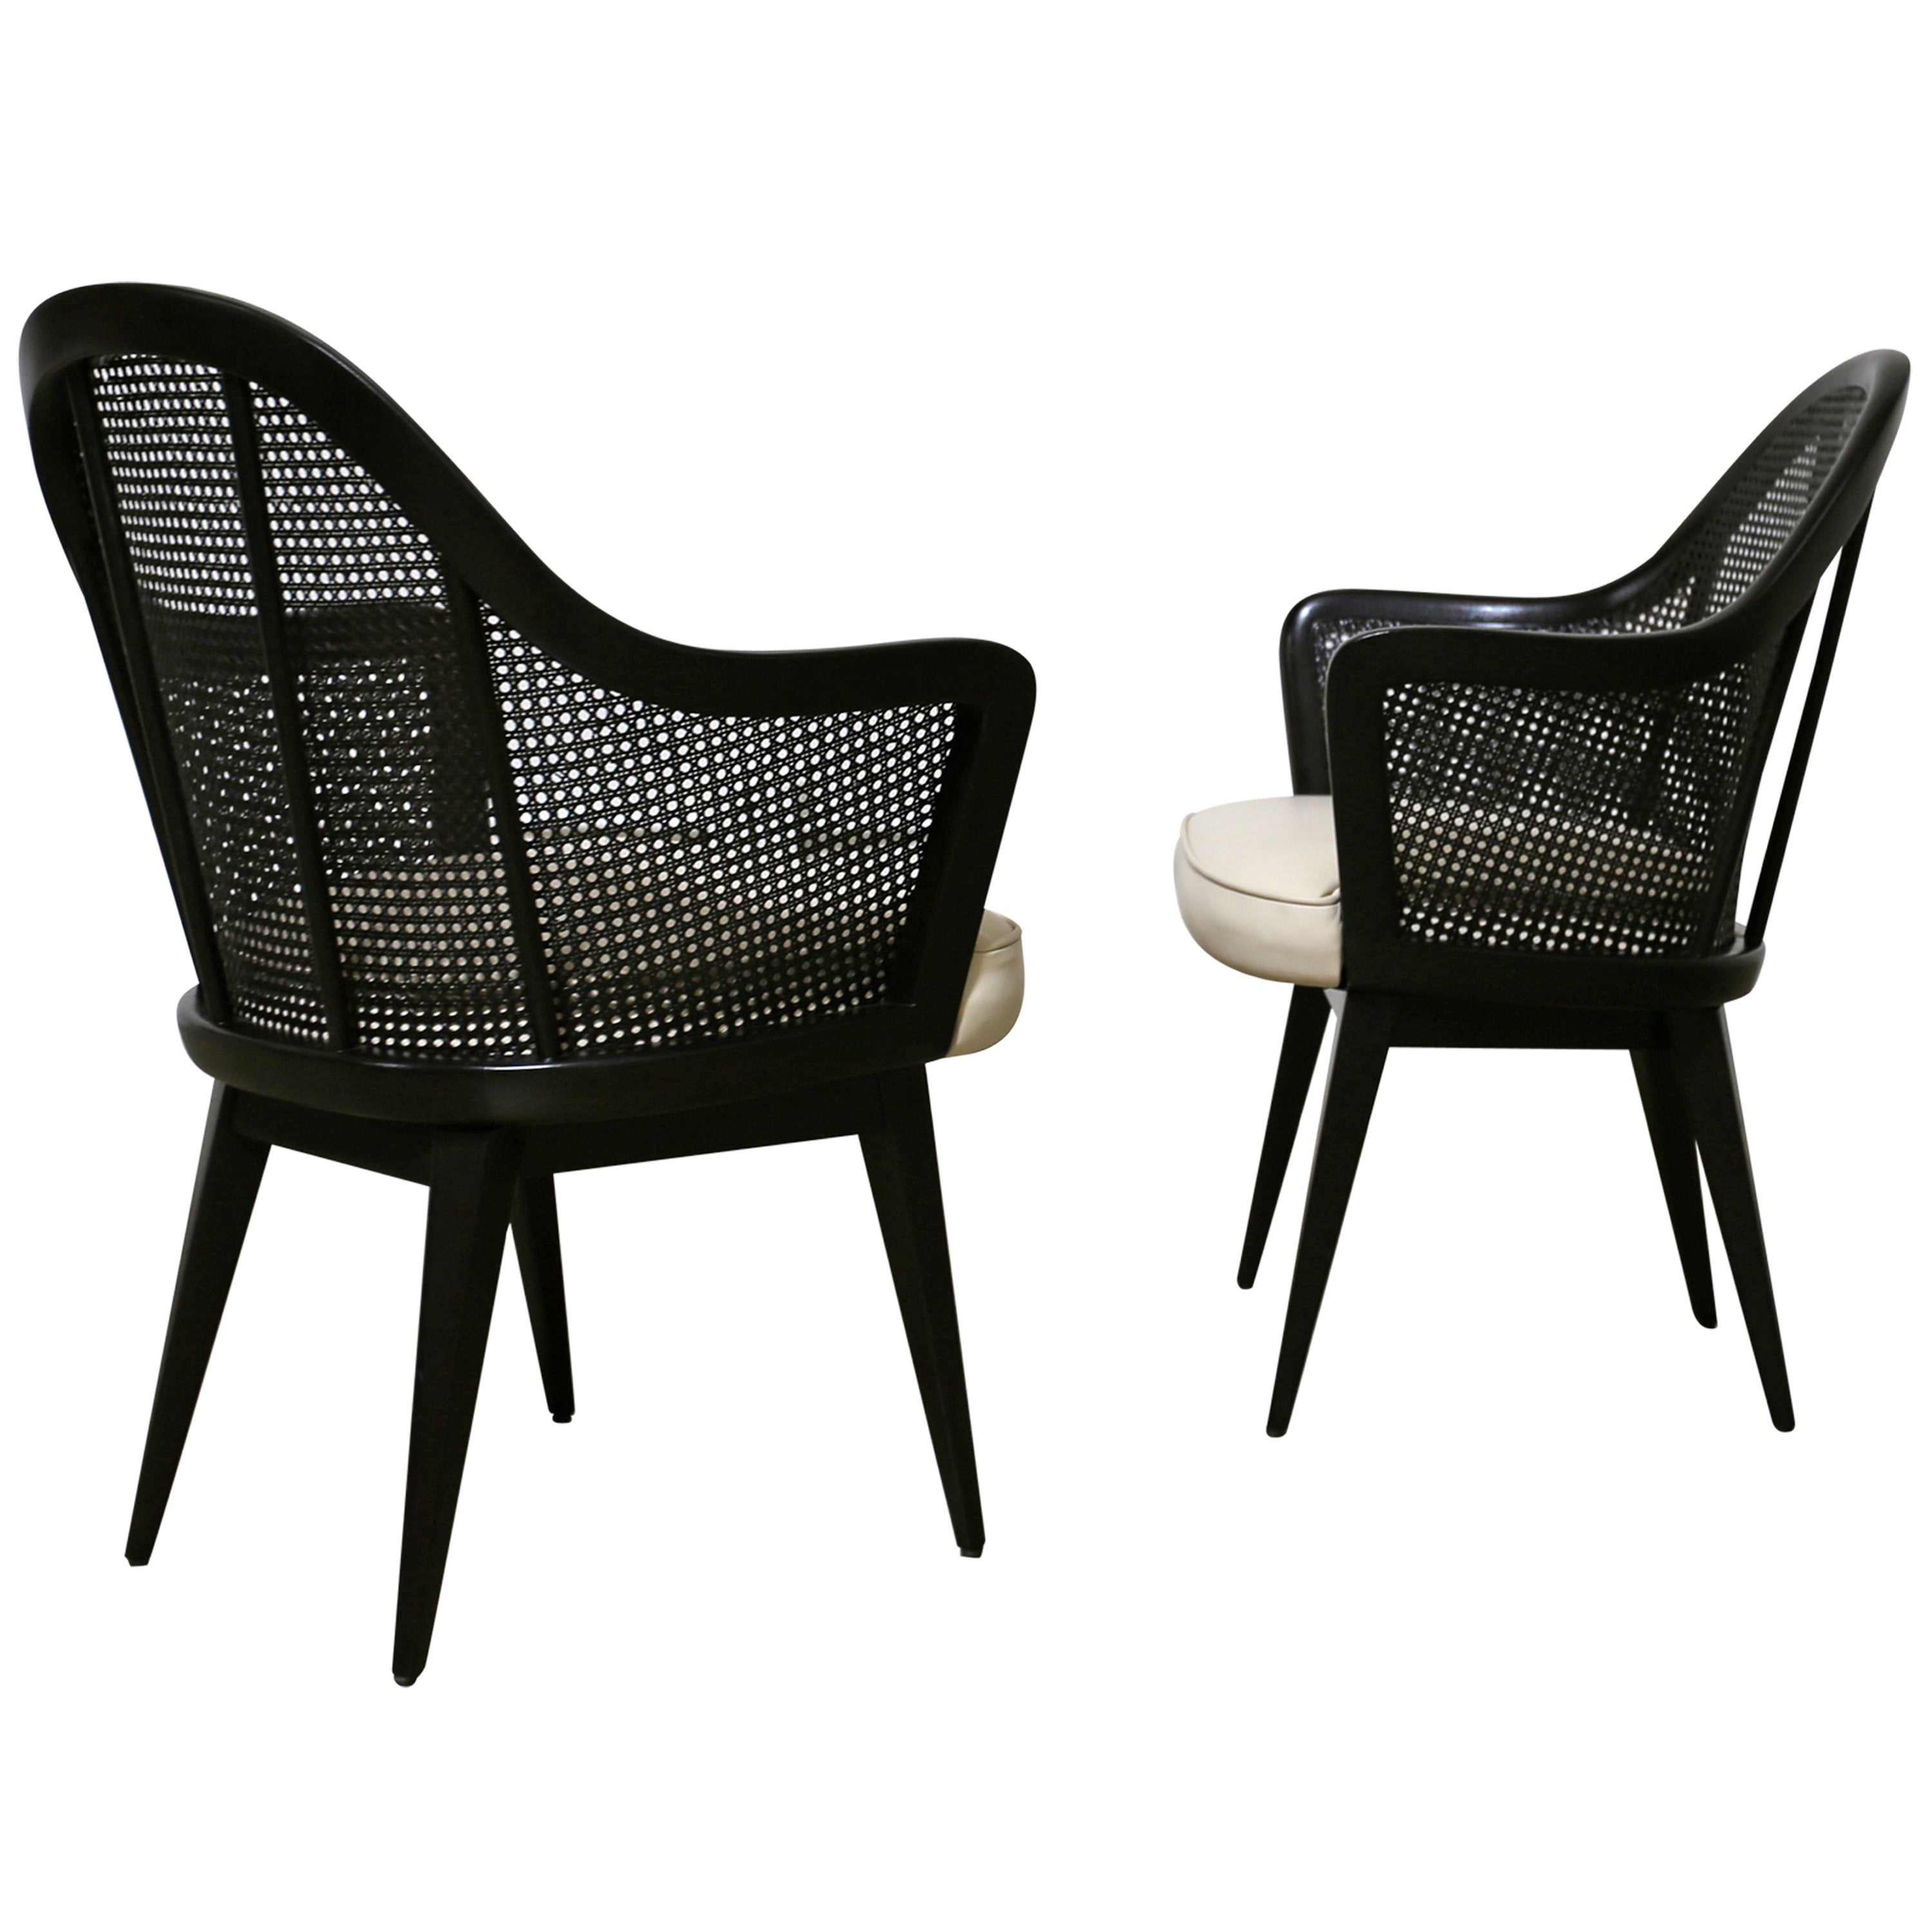 Pair of Caned Back Armchairs by Harvey Probber